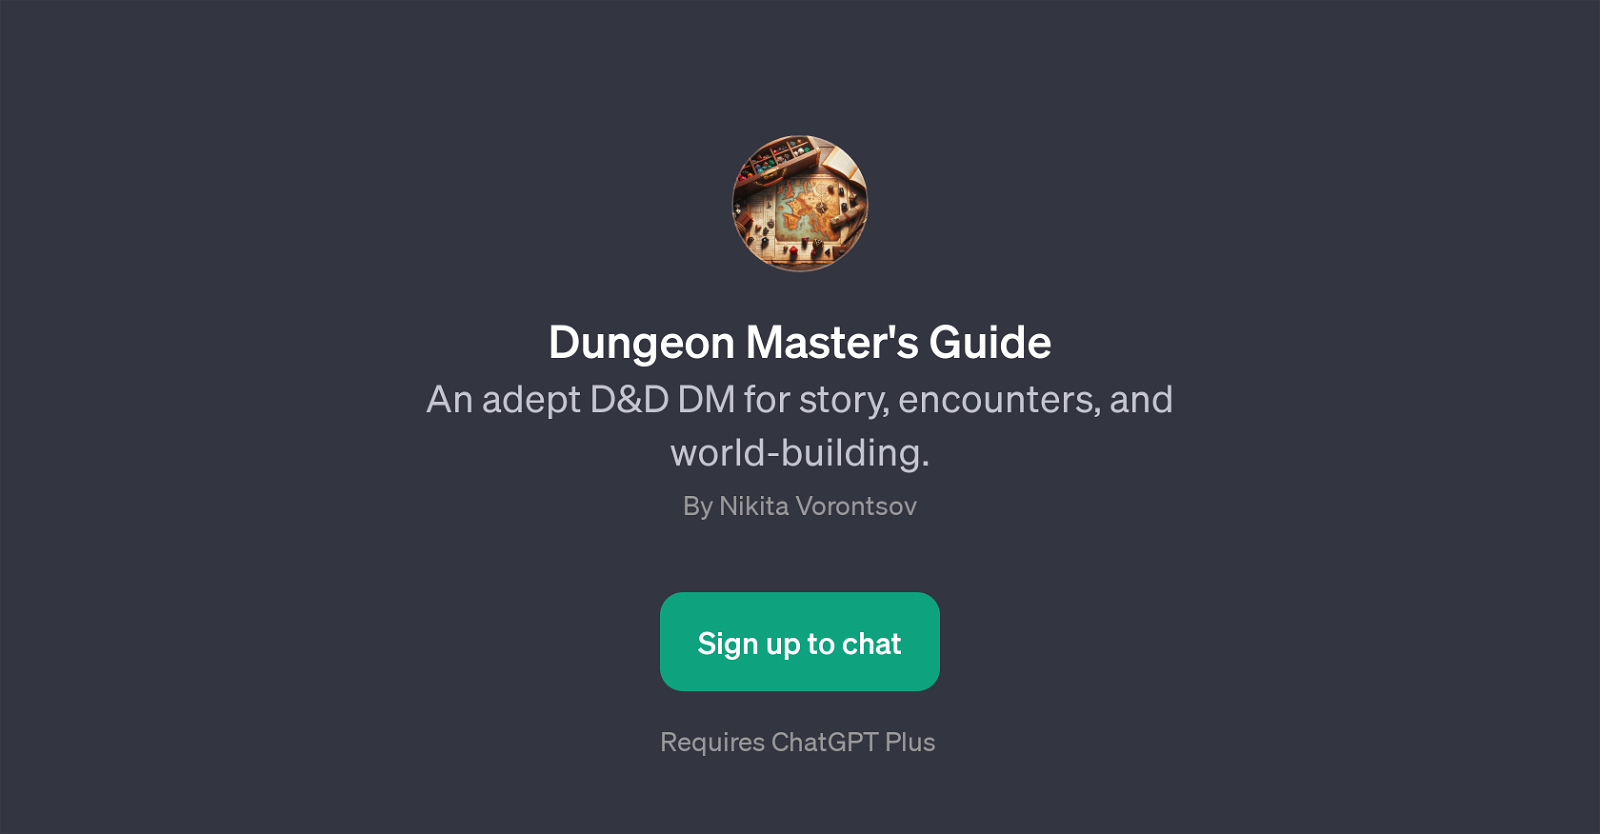 Dungeon Master's Guide website